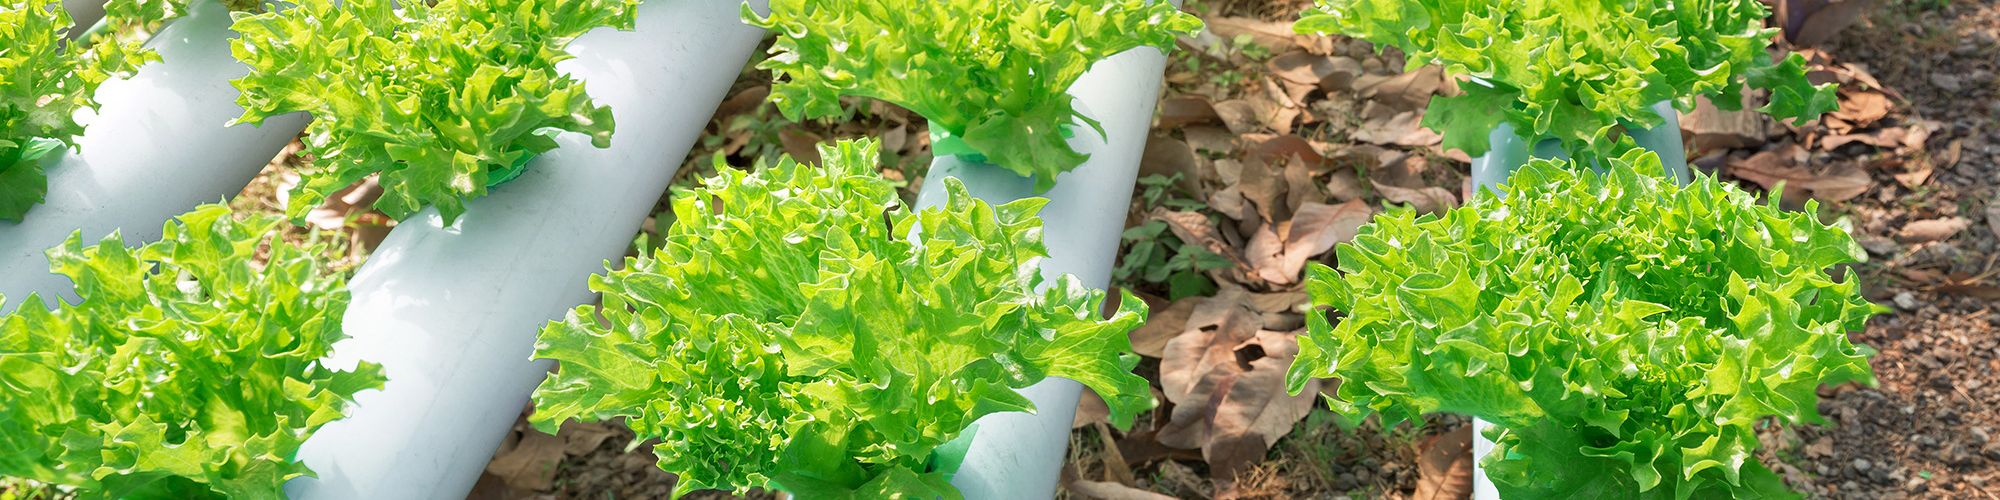 Hydroponic or Soilless Culture vegetable farm, Outdoor organic hydroponic vegetable cultivation farm.